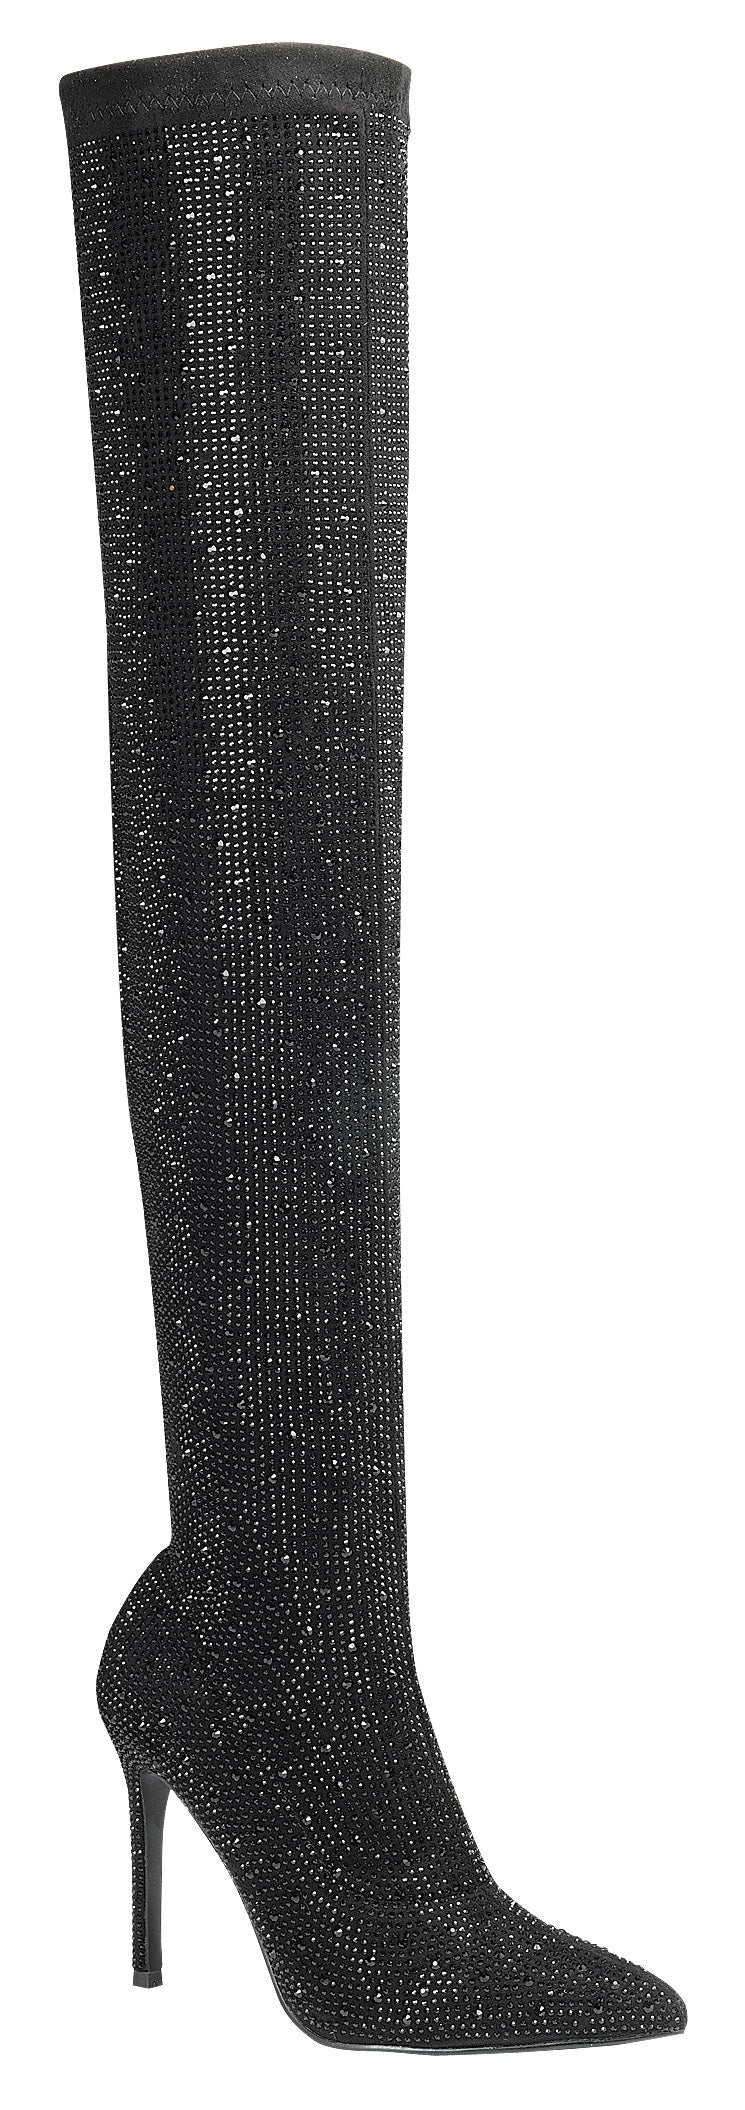 Rhinestone Over The Knee Boots Ensure-18